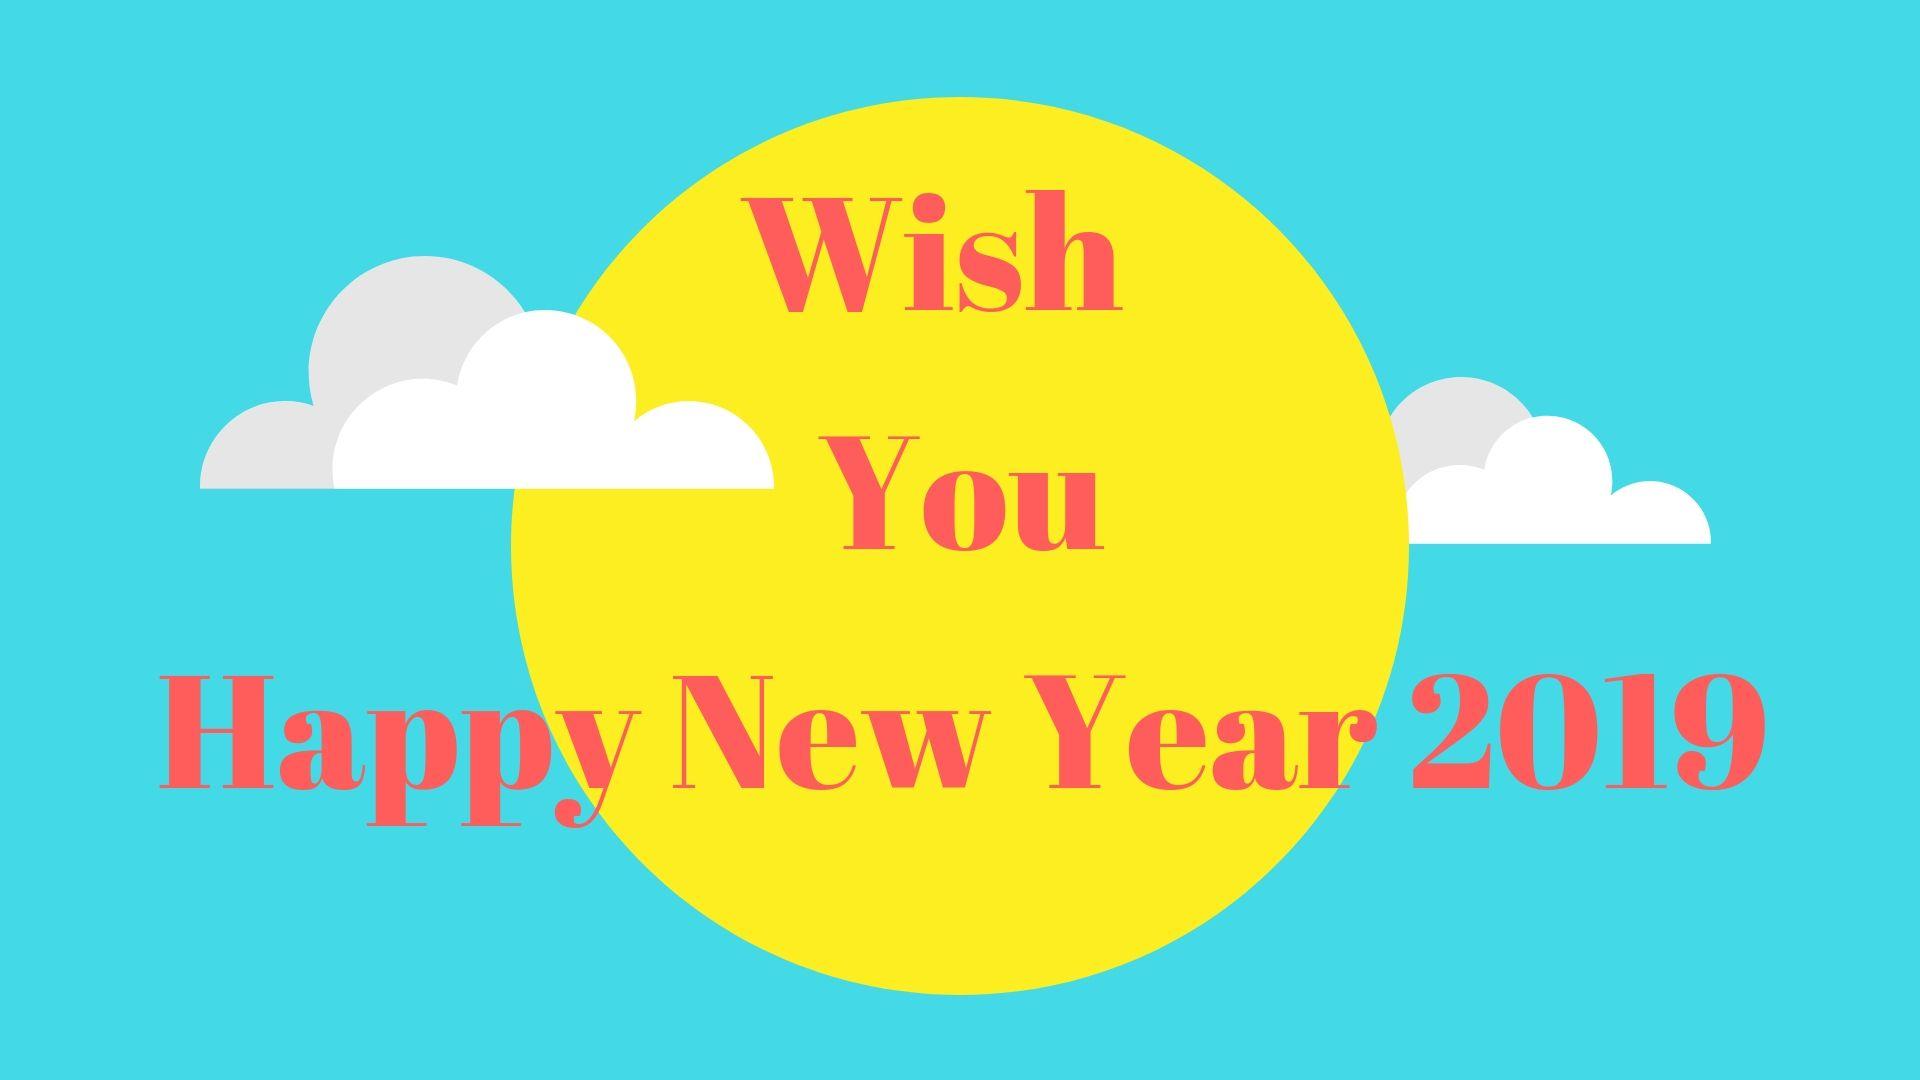 Happy New Year 2019 Image, Wishes, Messages & Greetings